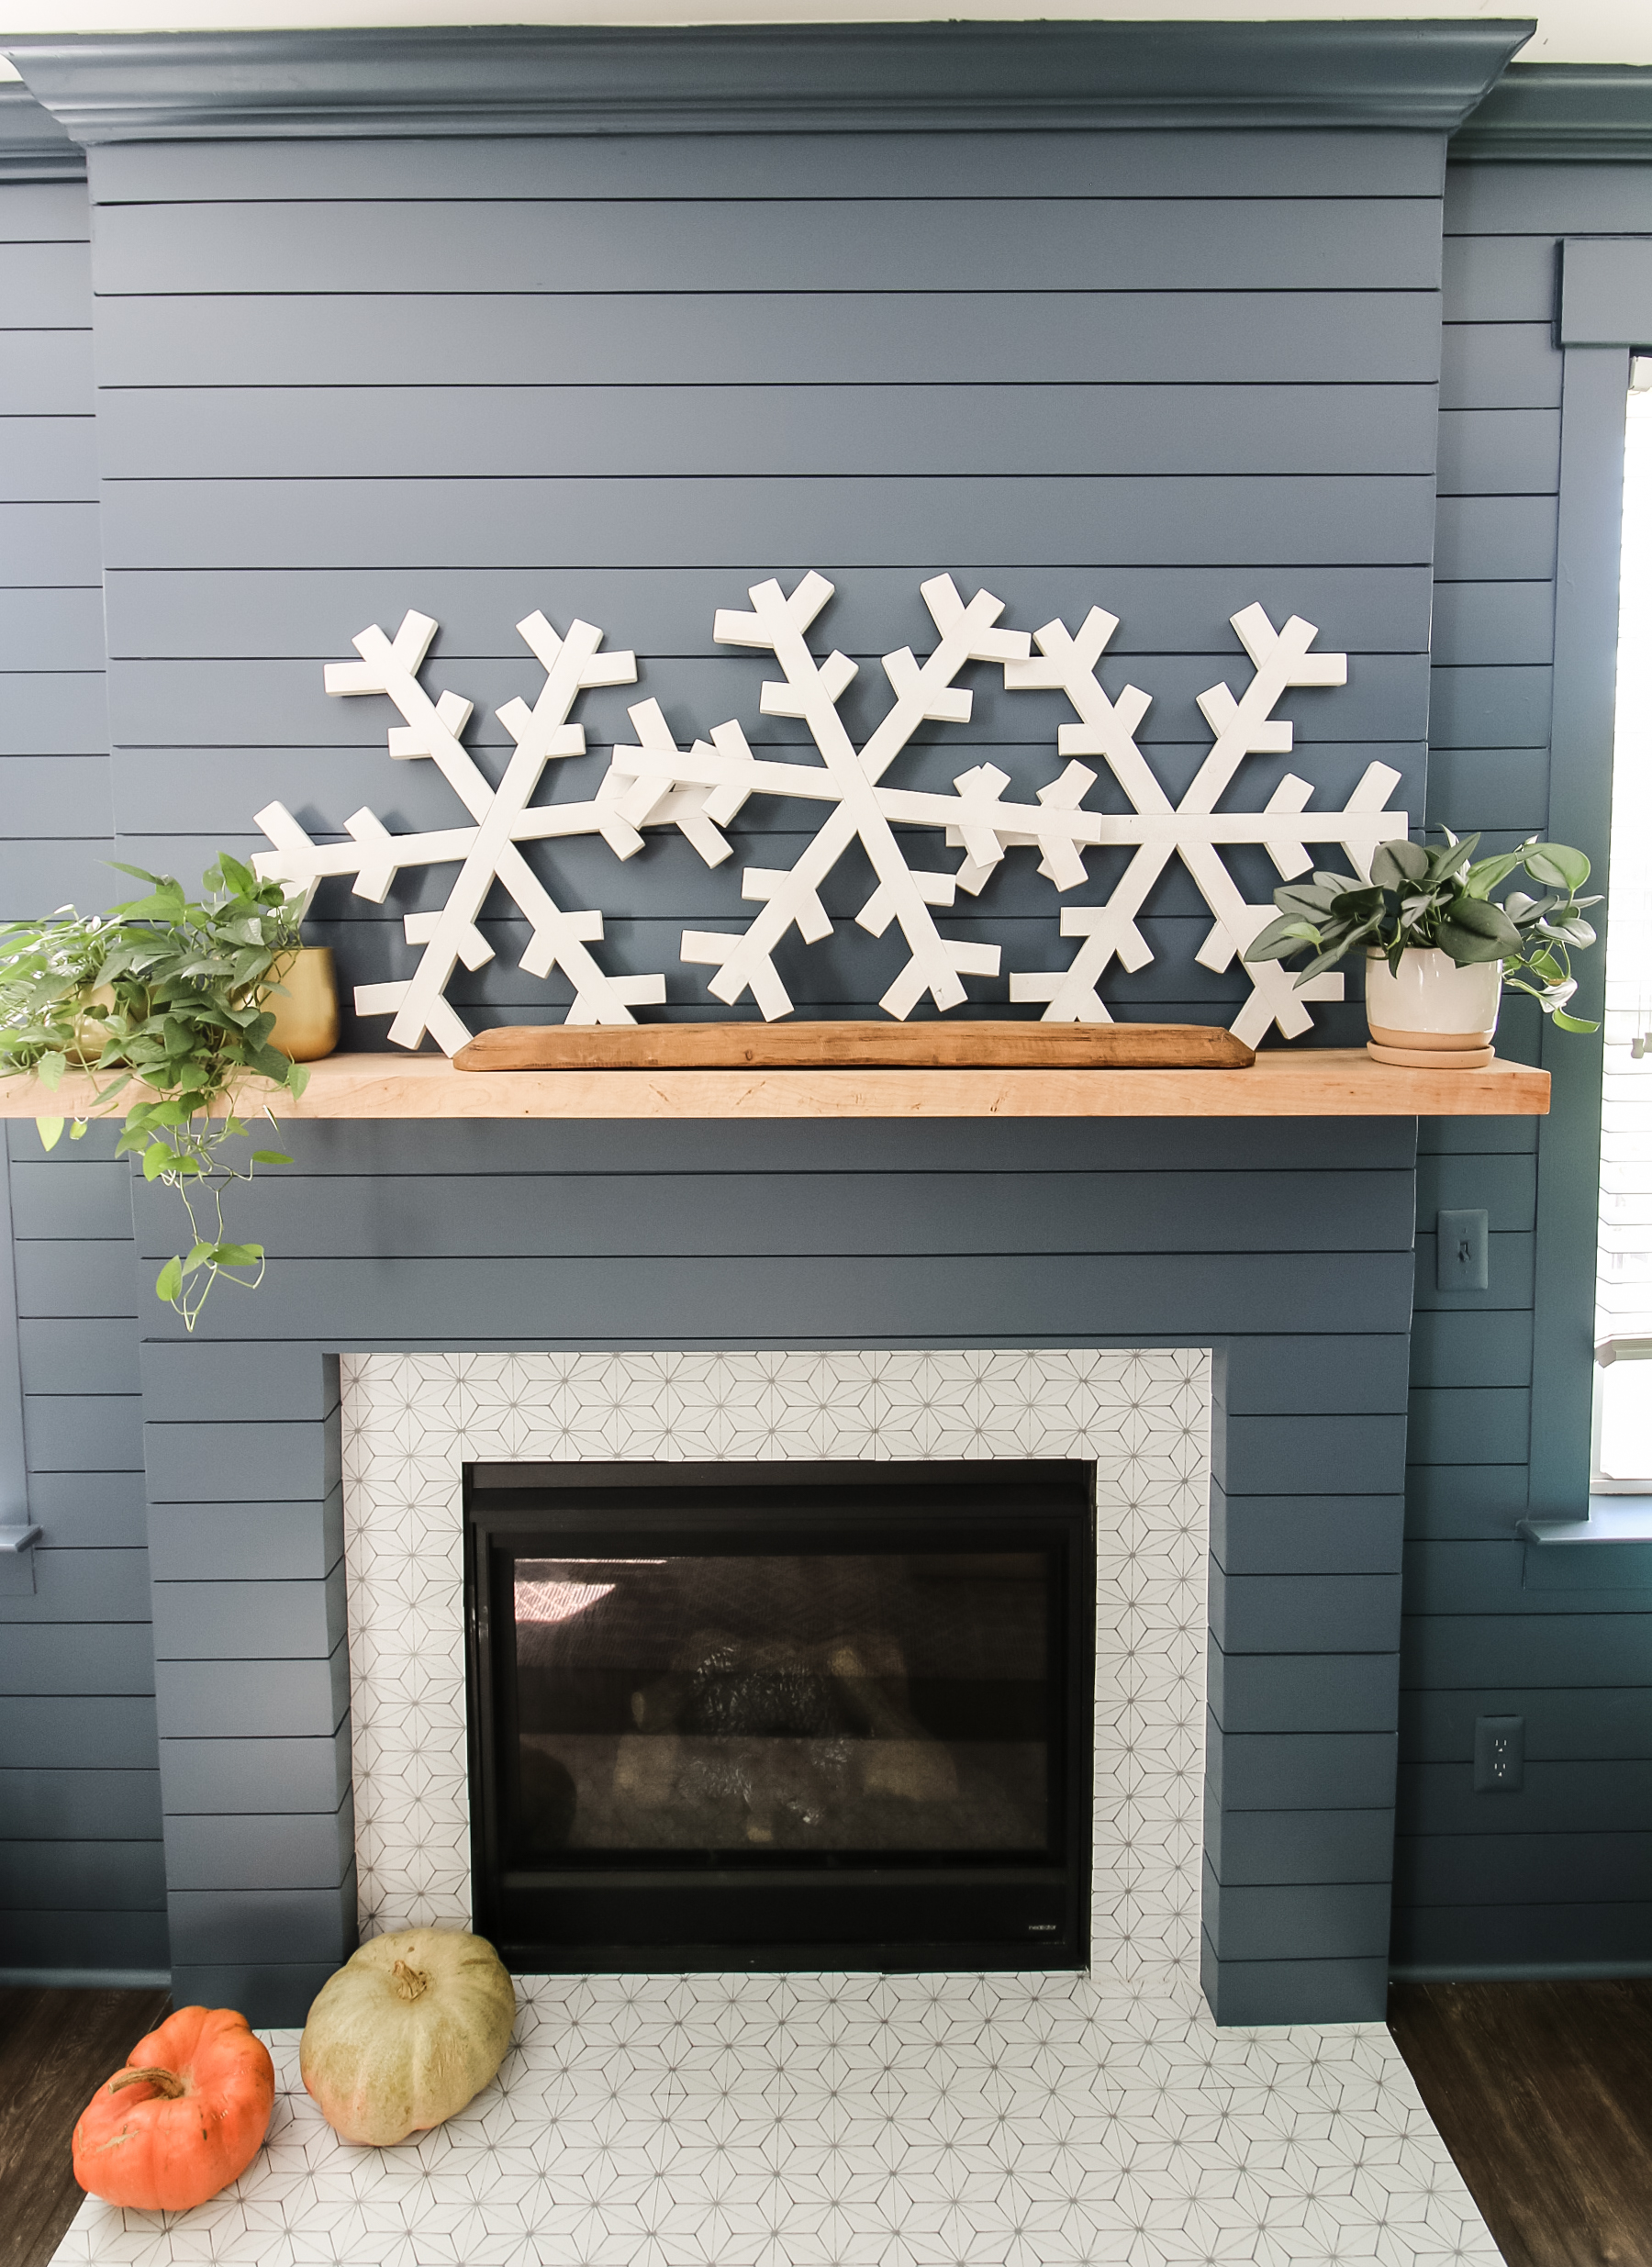 DIY wooden snowflakes above fireplace